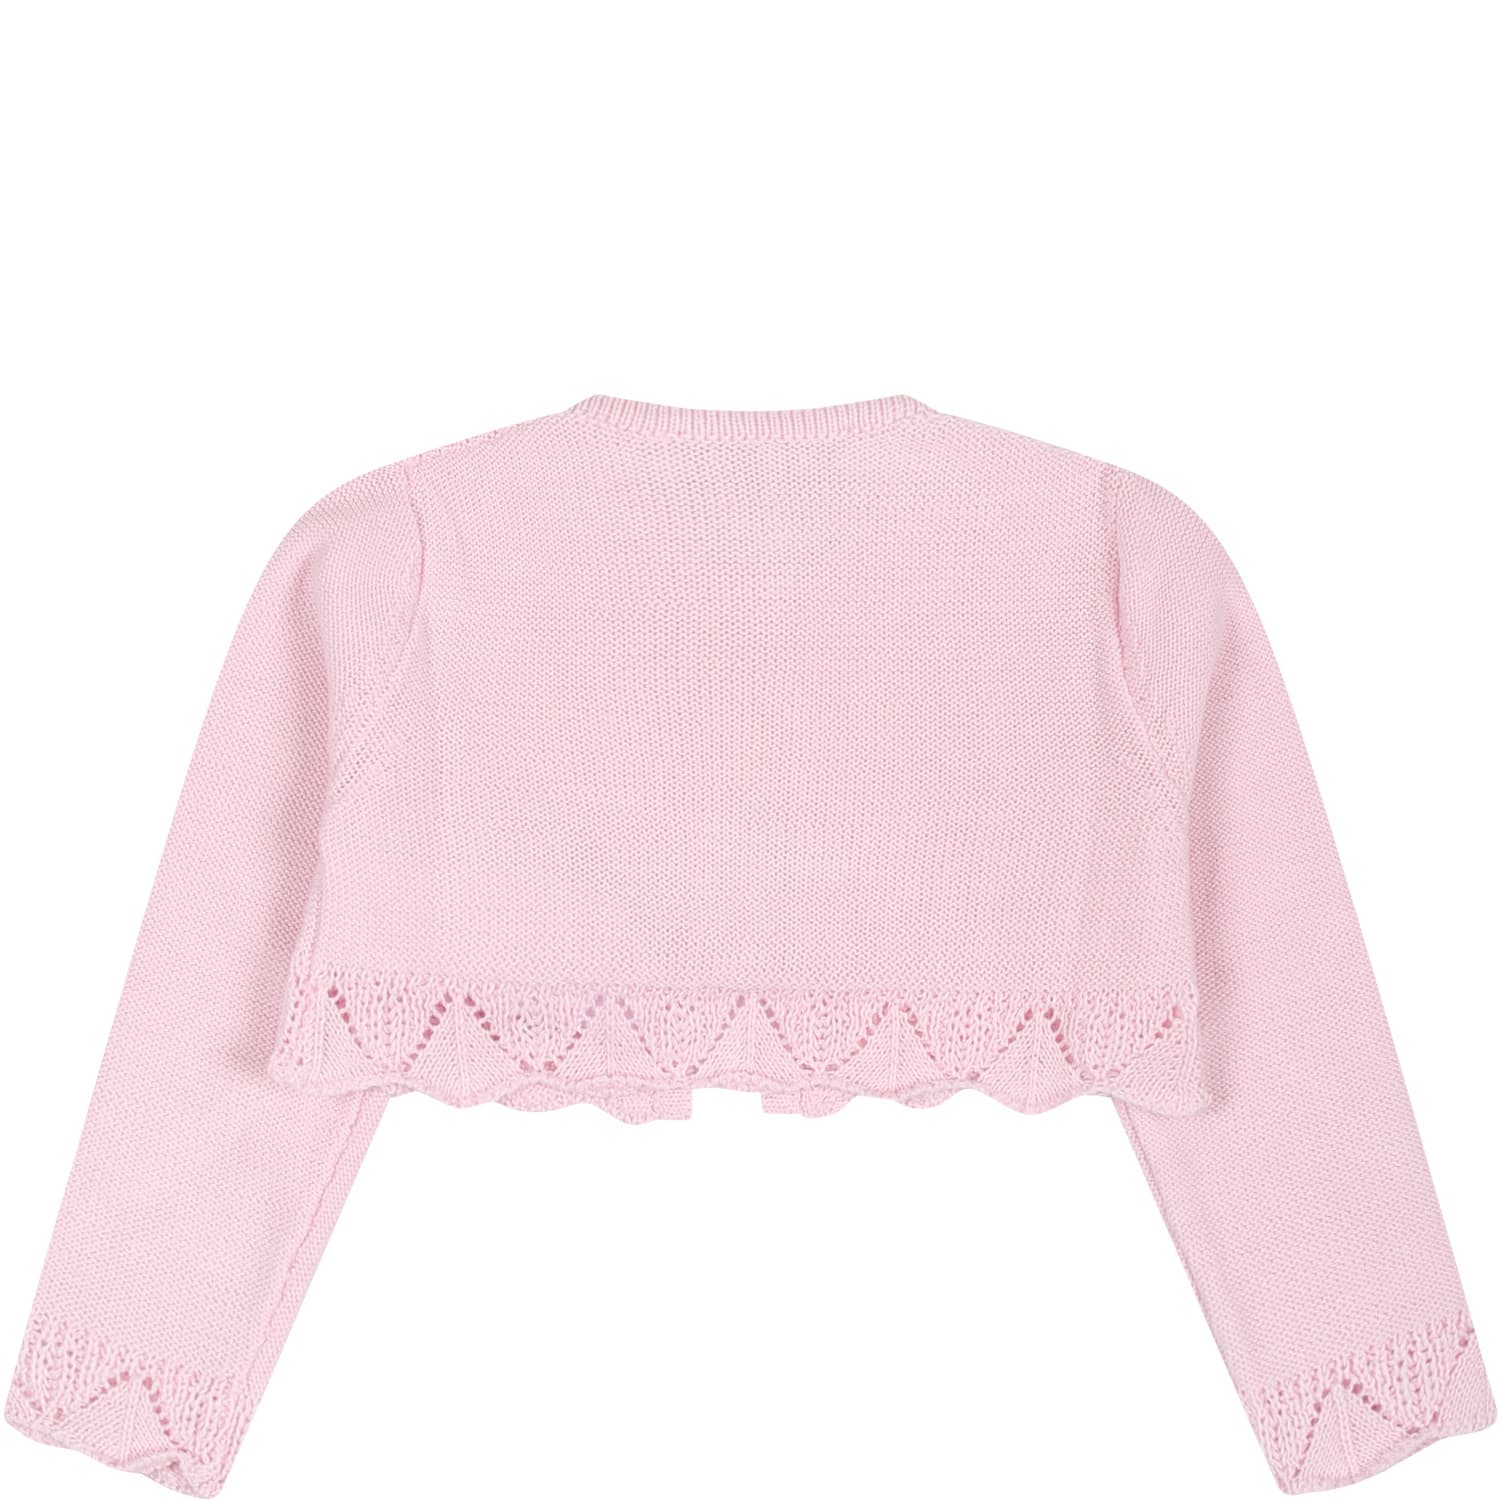 Shop Monnalisa Pink Cardigan For Baby Girl With Ruffles